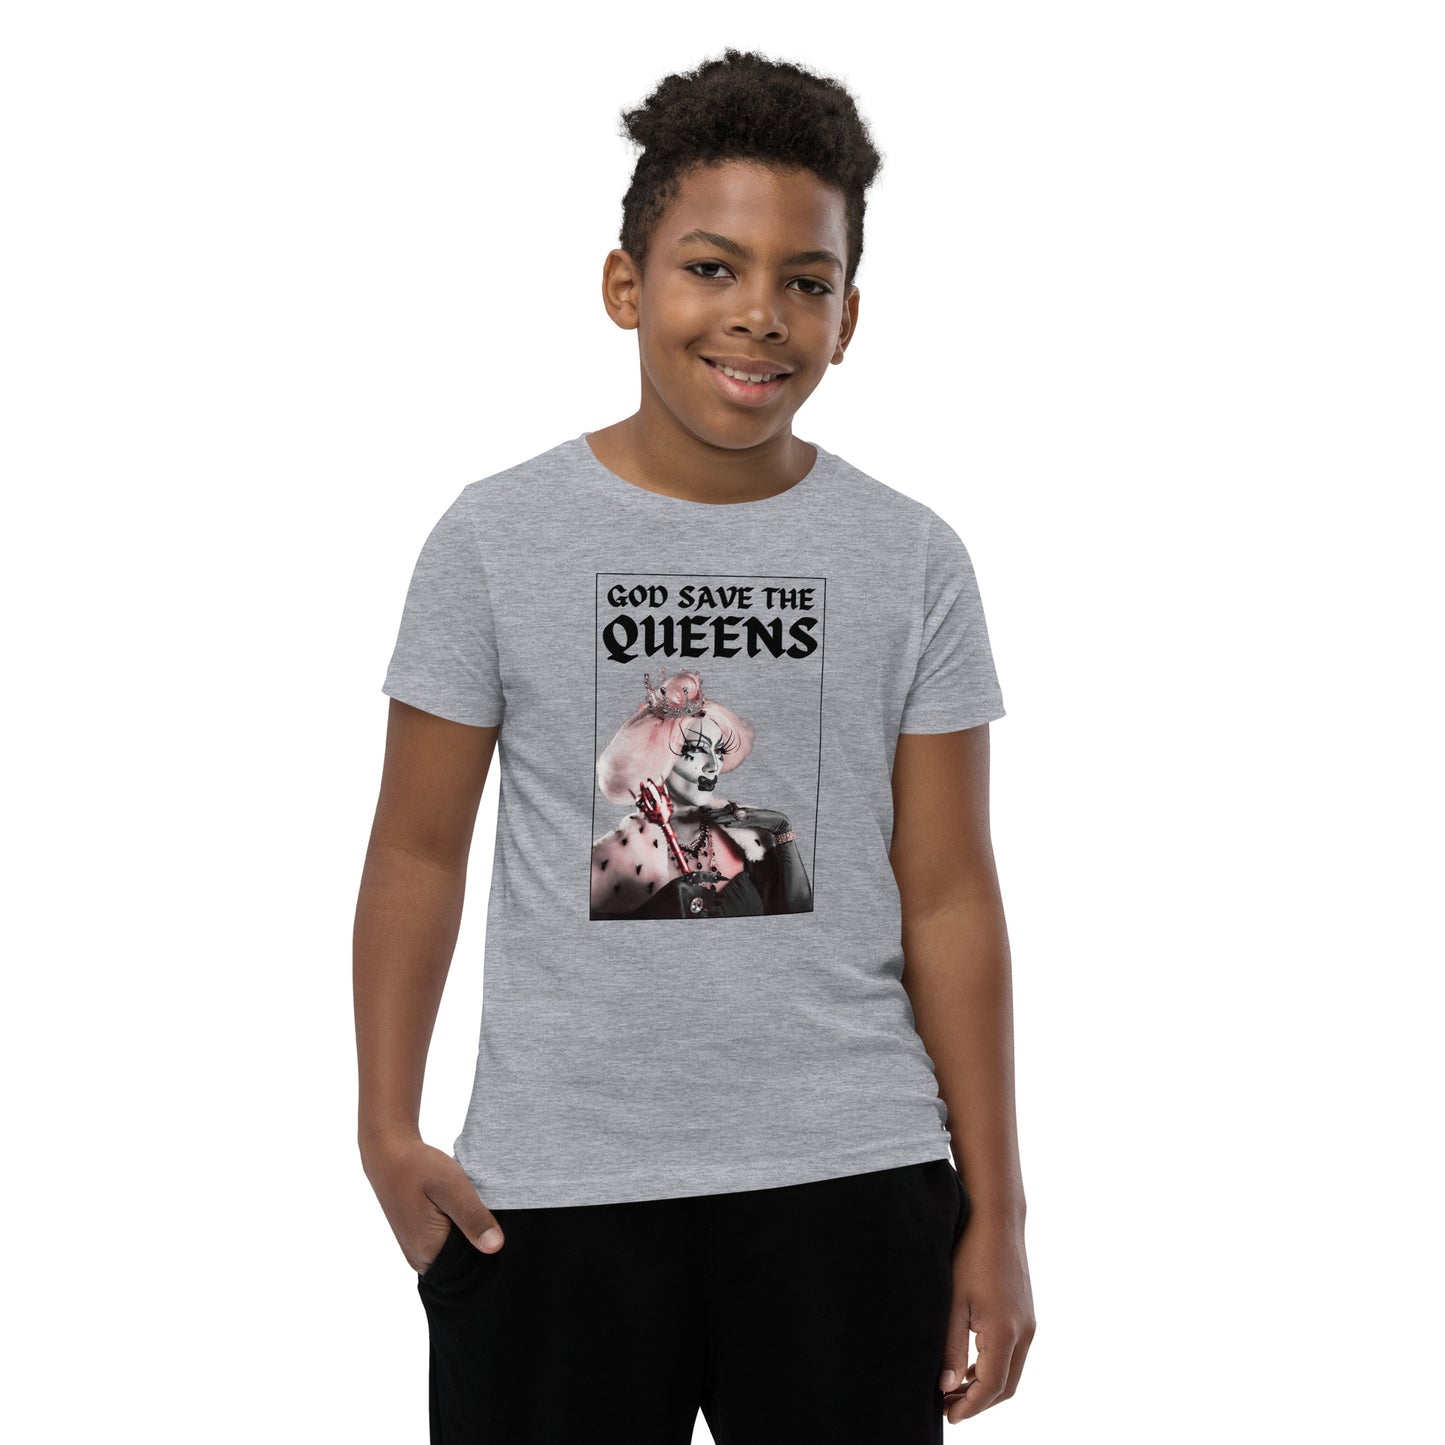 God Save the Queens Youth Tee - Light Colors